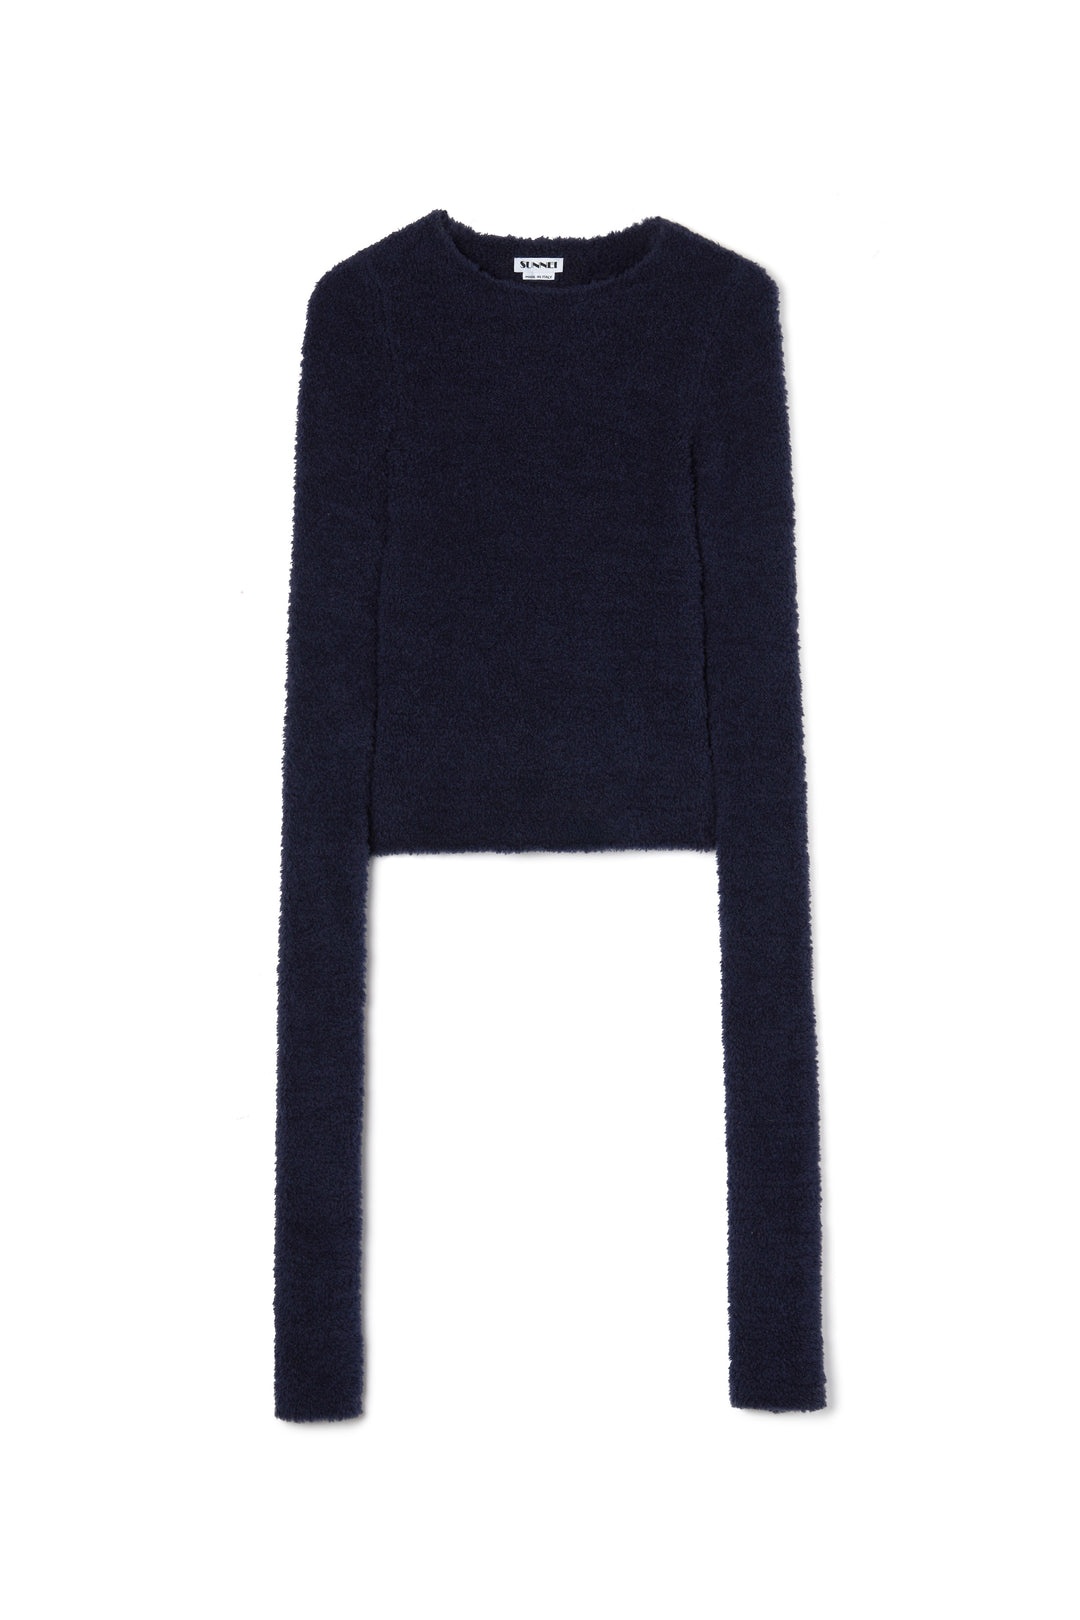 EXTRA-LONG SLEEVES FLUFFY TOP / navy - 1